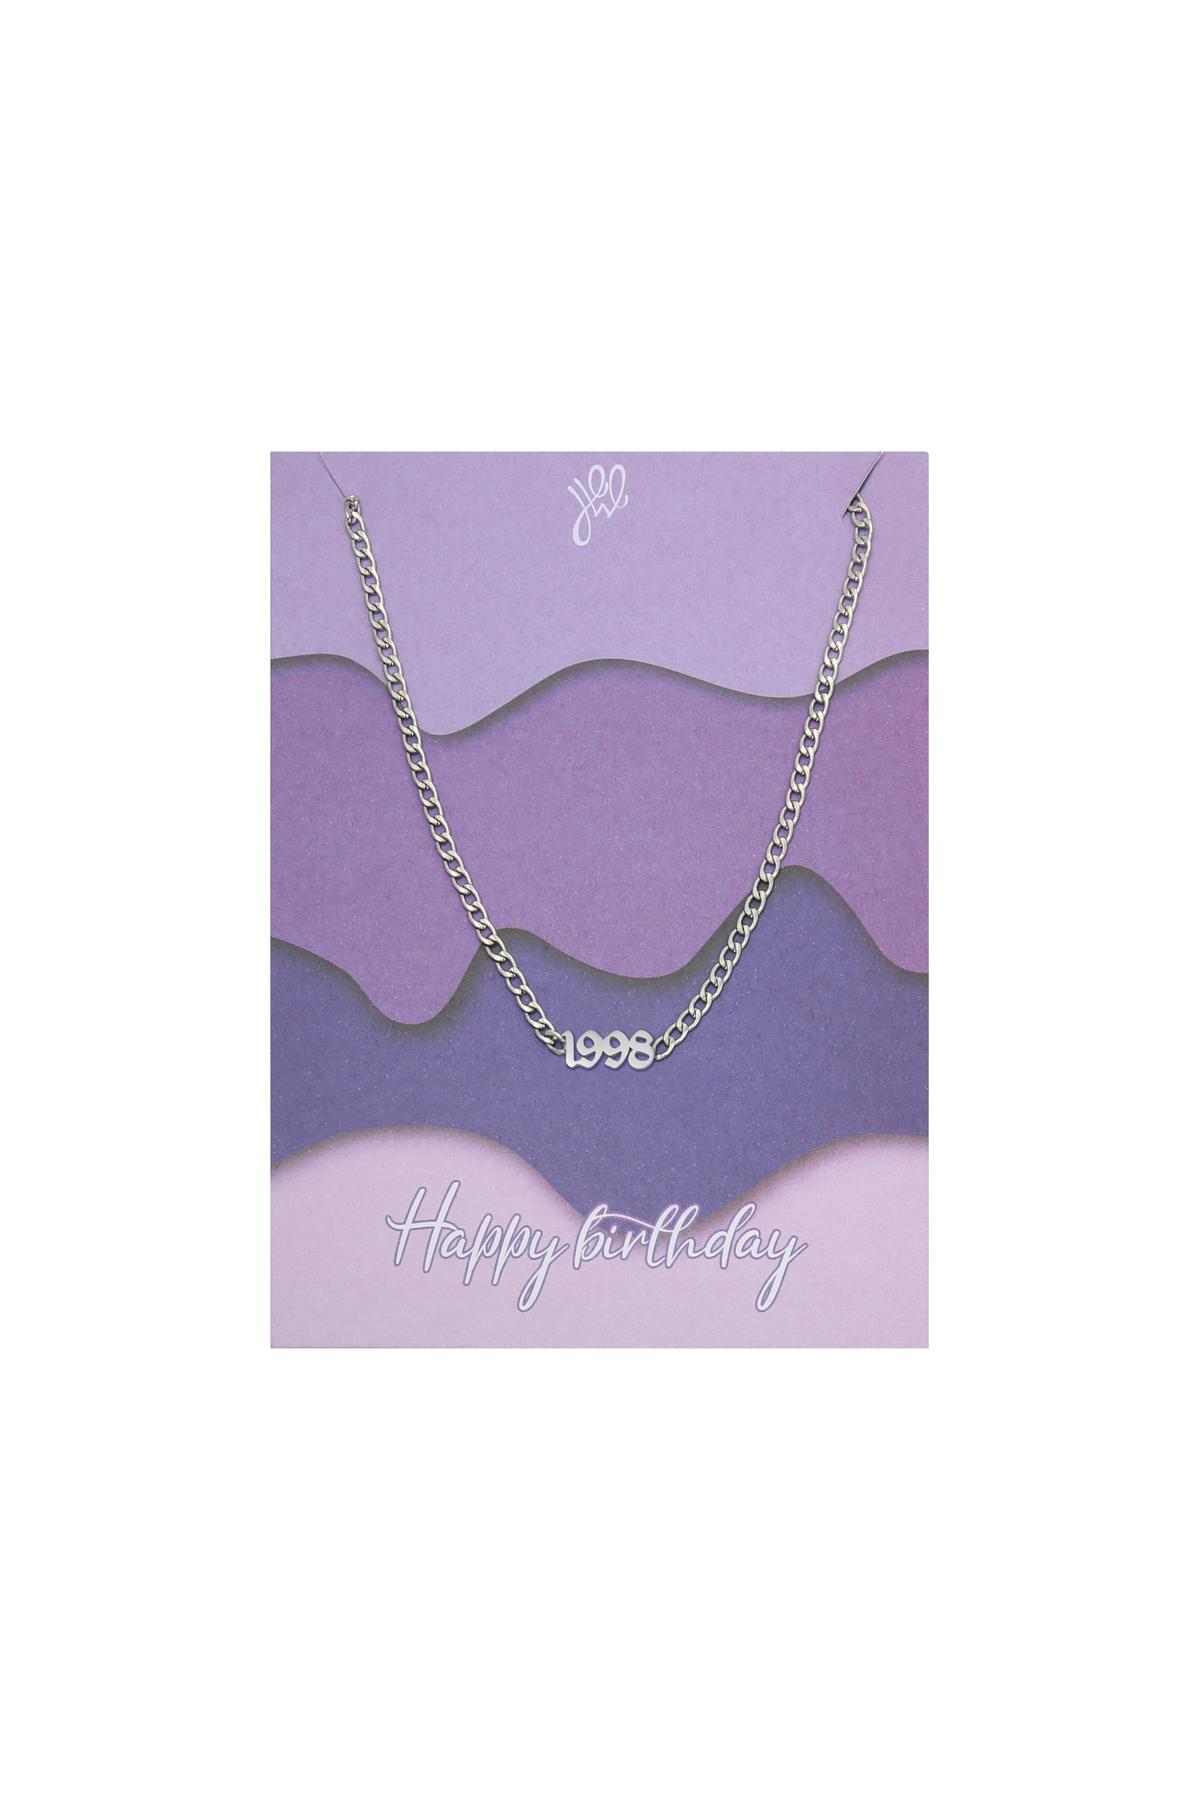 Silver / Necklace Happy Birthday Years - 1998 Silver Stainless Steel Picture11